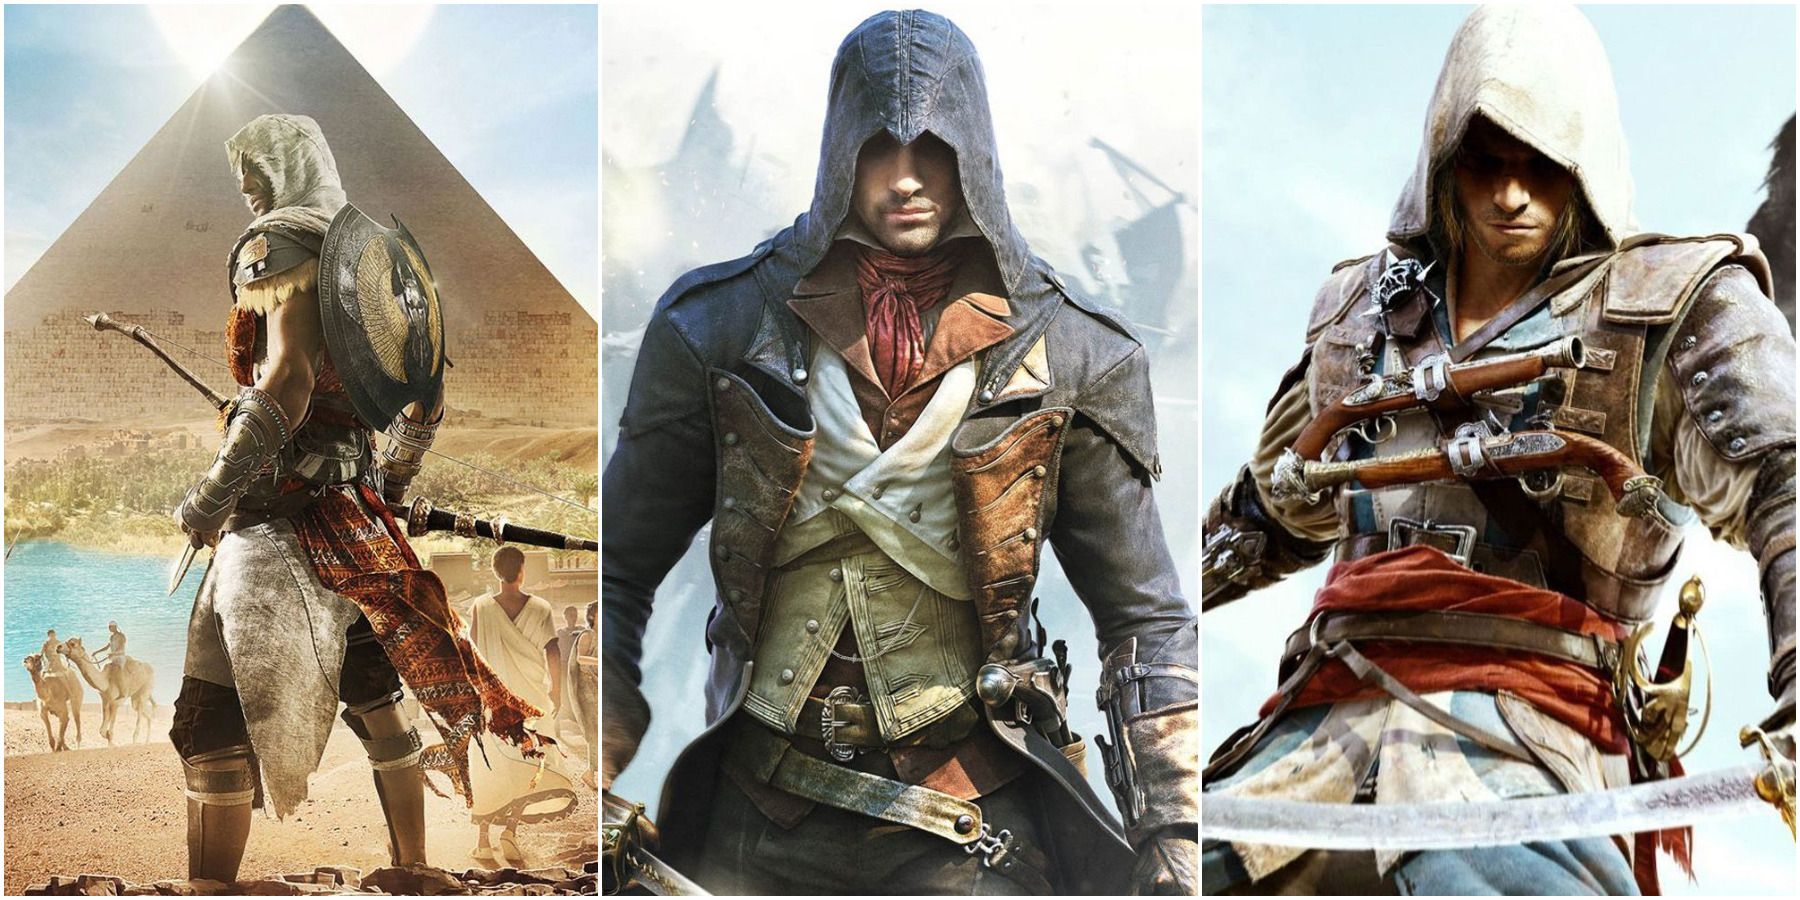 Strongest Assassins Creed Protagonists